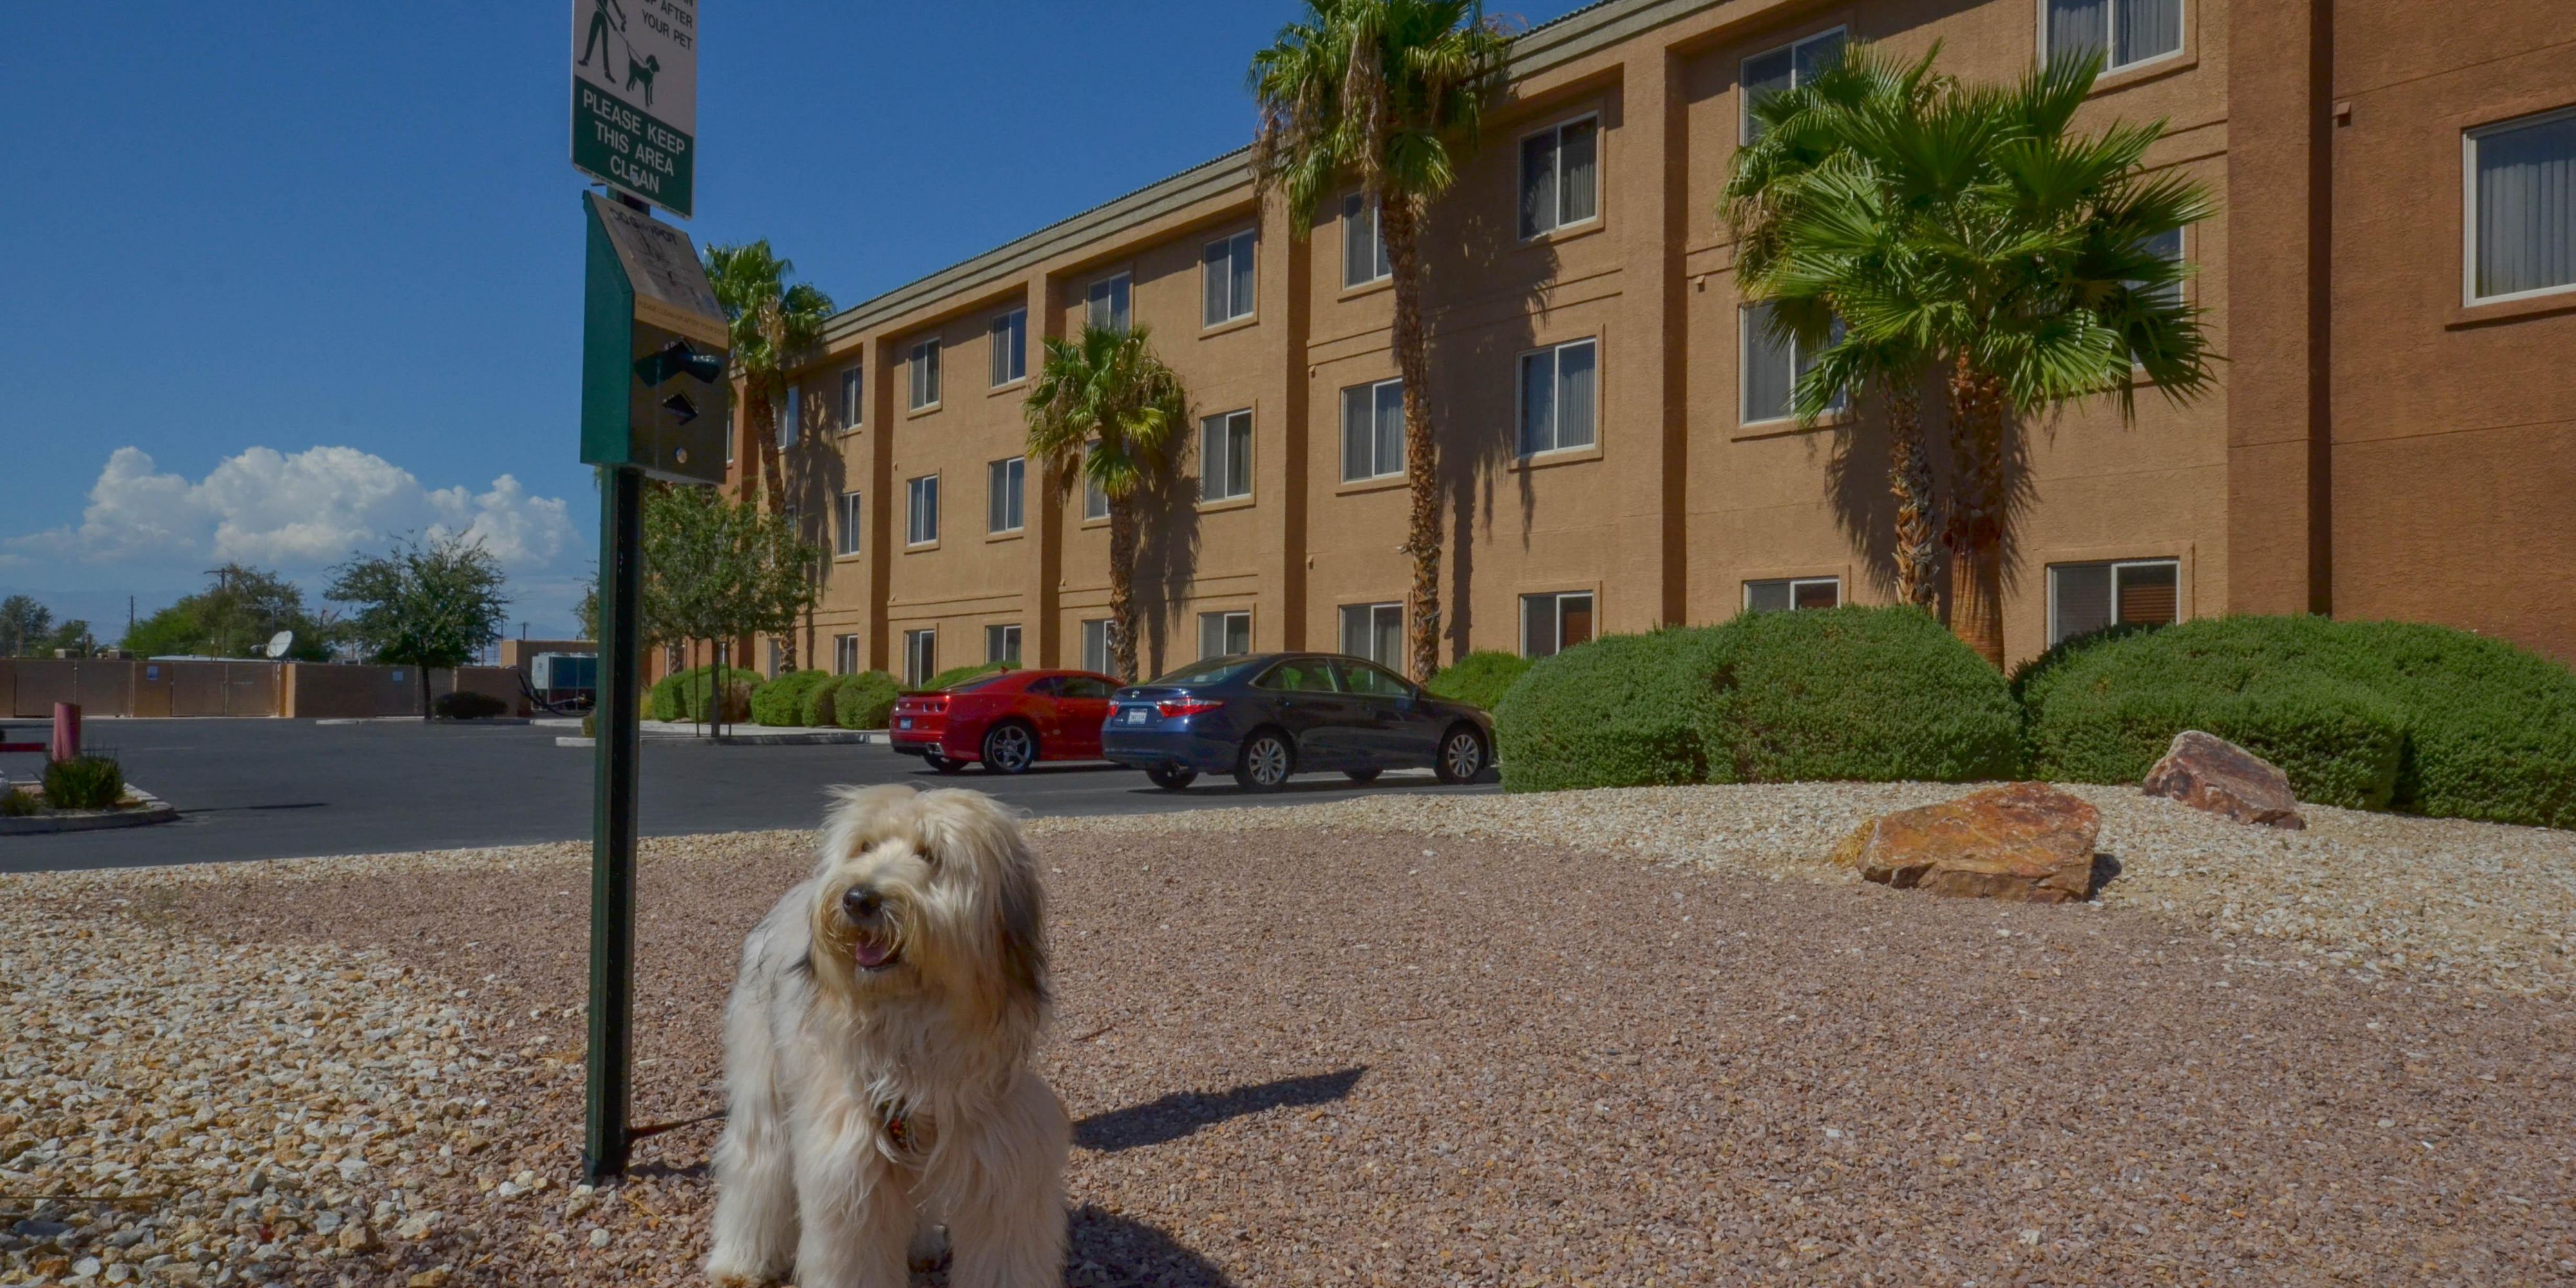 We love having the family pet with us to make your stay extra comfortable.  The Holiday Inn Express Las Vegas Nellis has rooms that are pet friendly, and we have plenty of space for you to walk your pets.  Please call or email us for our pet fees and weight limits.